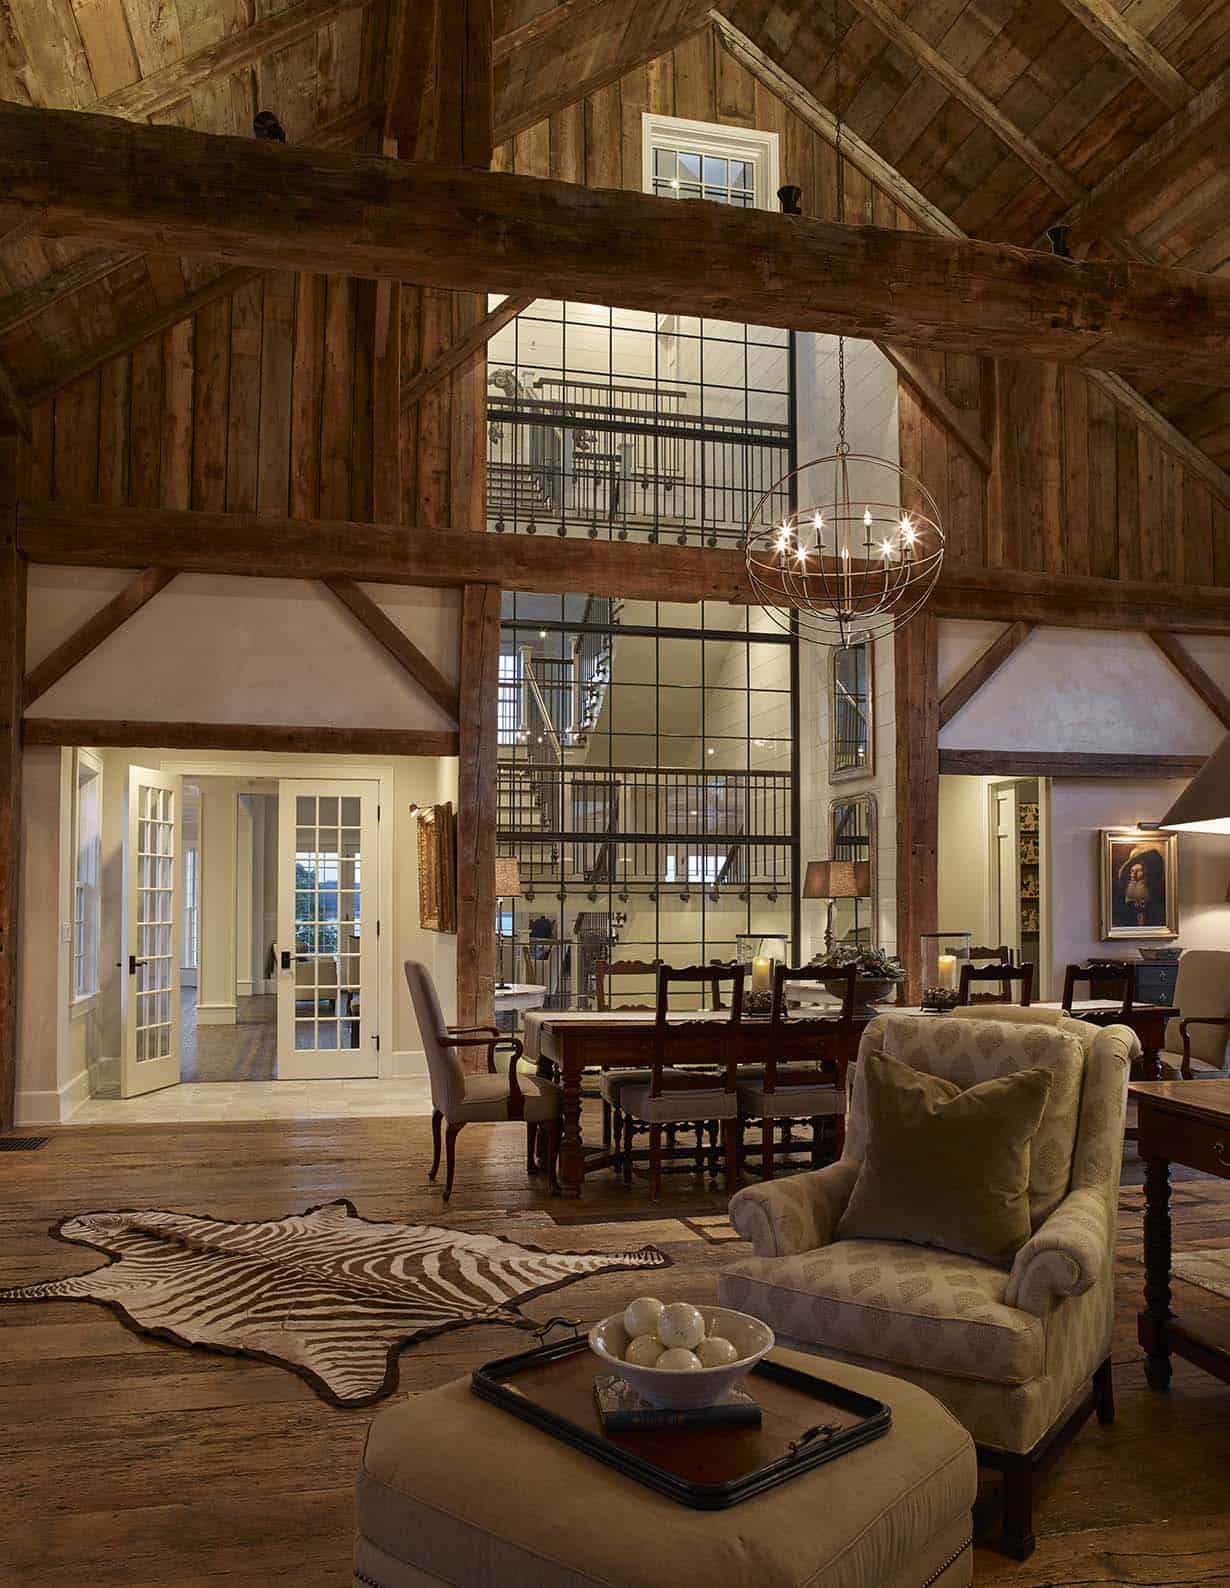 Gorgeous weathered barn is centerpiece of this New England farmhouse